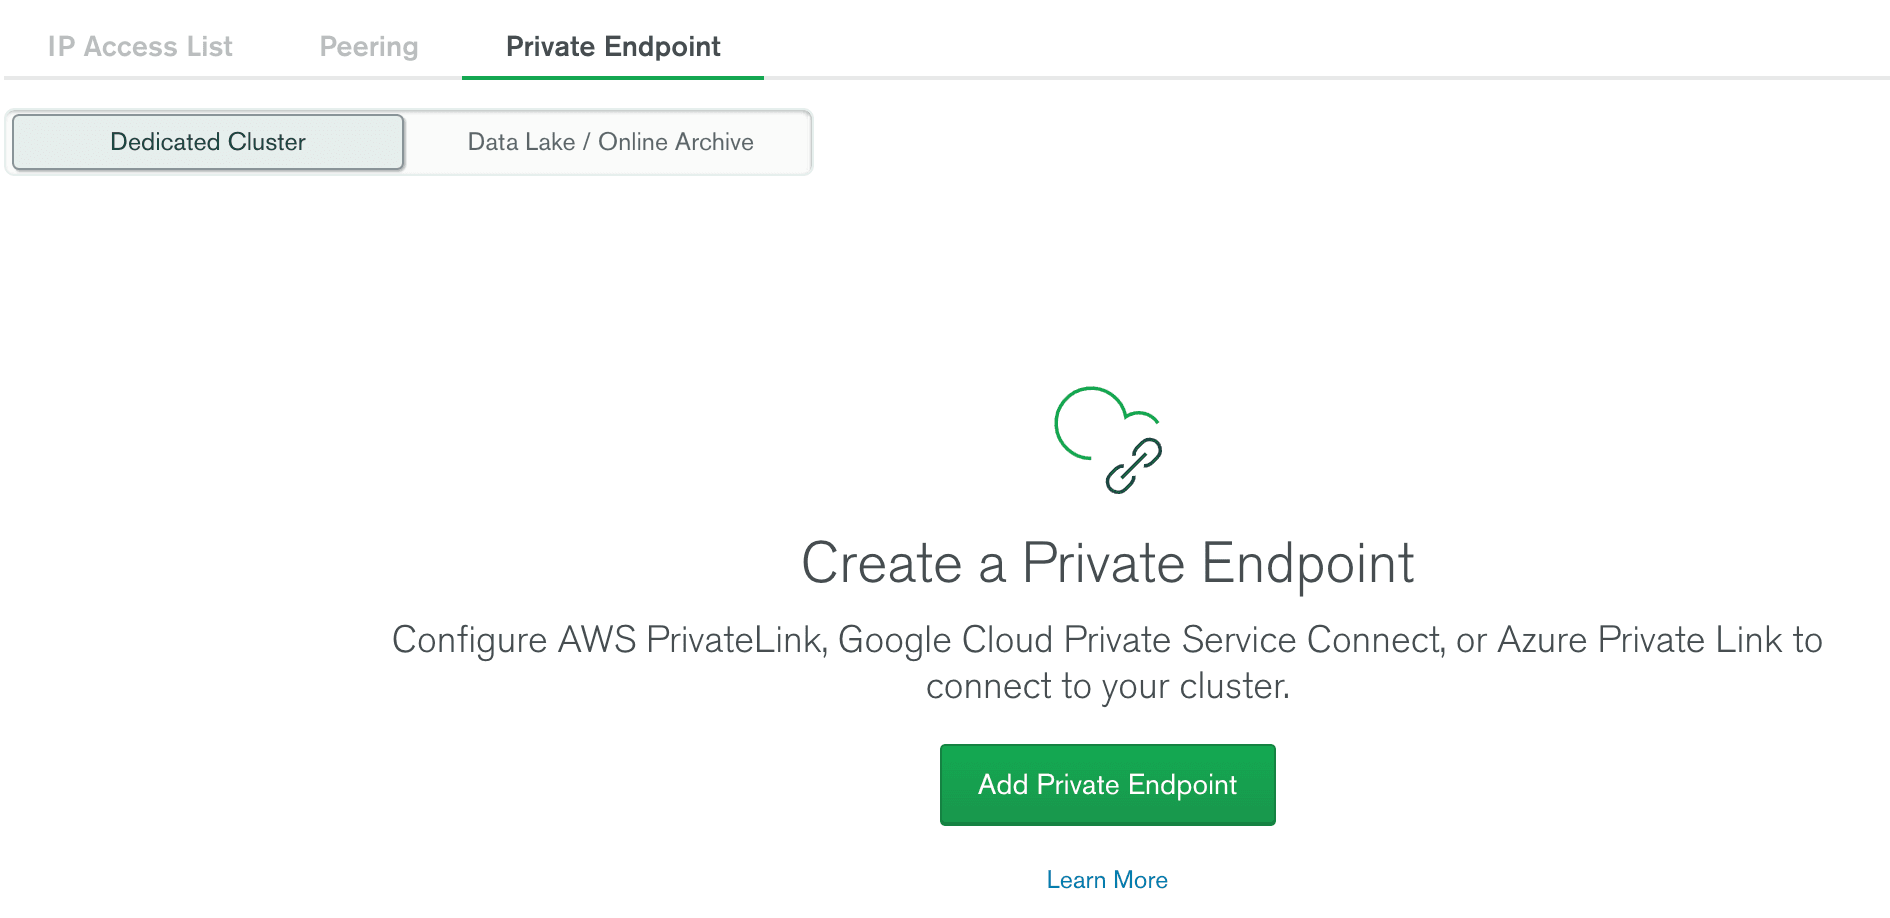 Figure 4. Add private endpoint